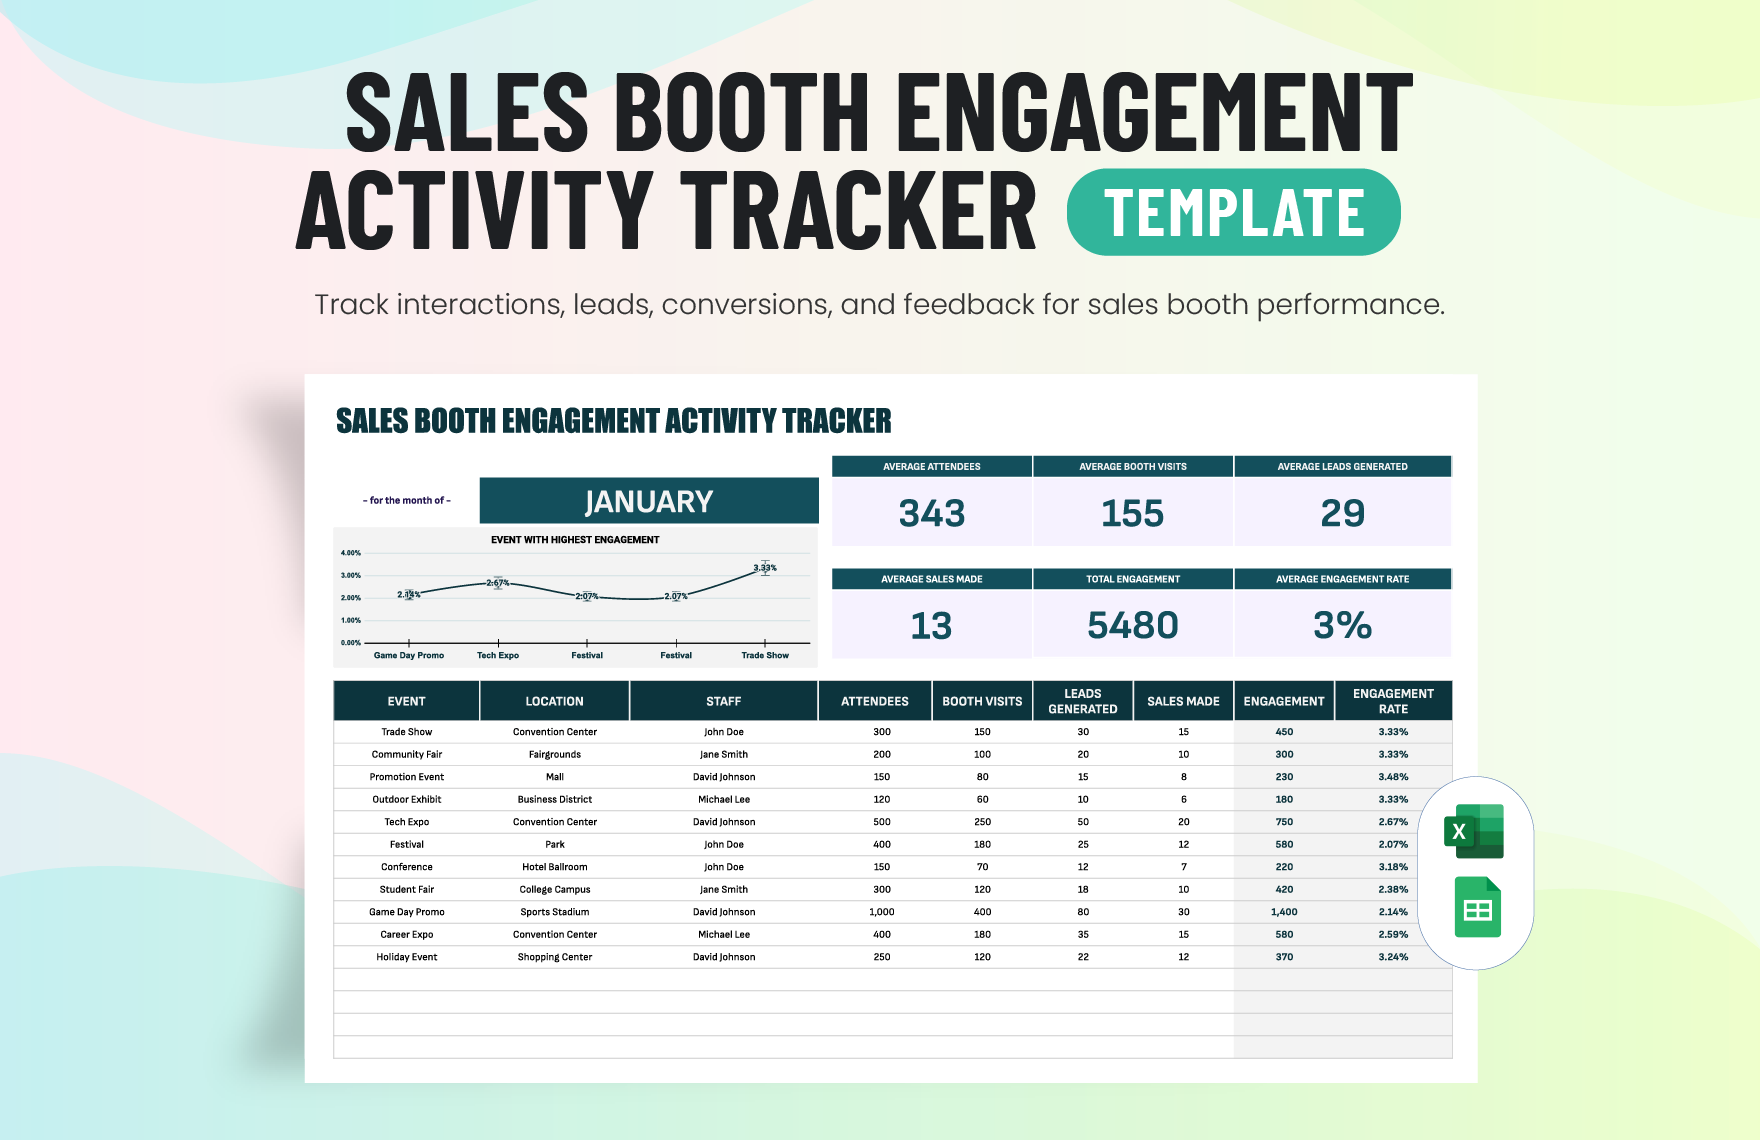 Sales Booth Engagement Activity Tracker Template in Excel, Google Sheets